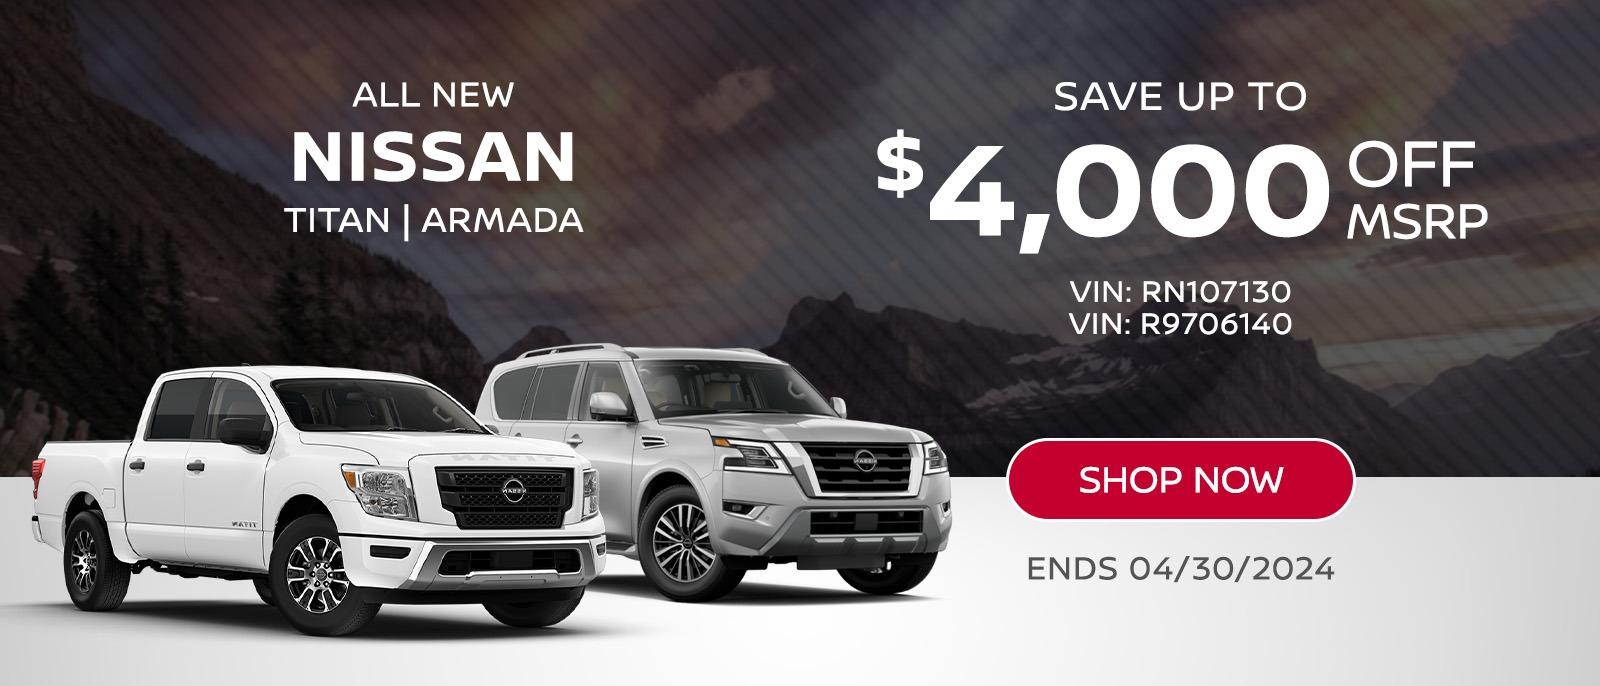 Save up to $4,000 OFF MSRP